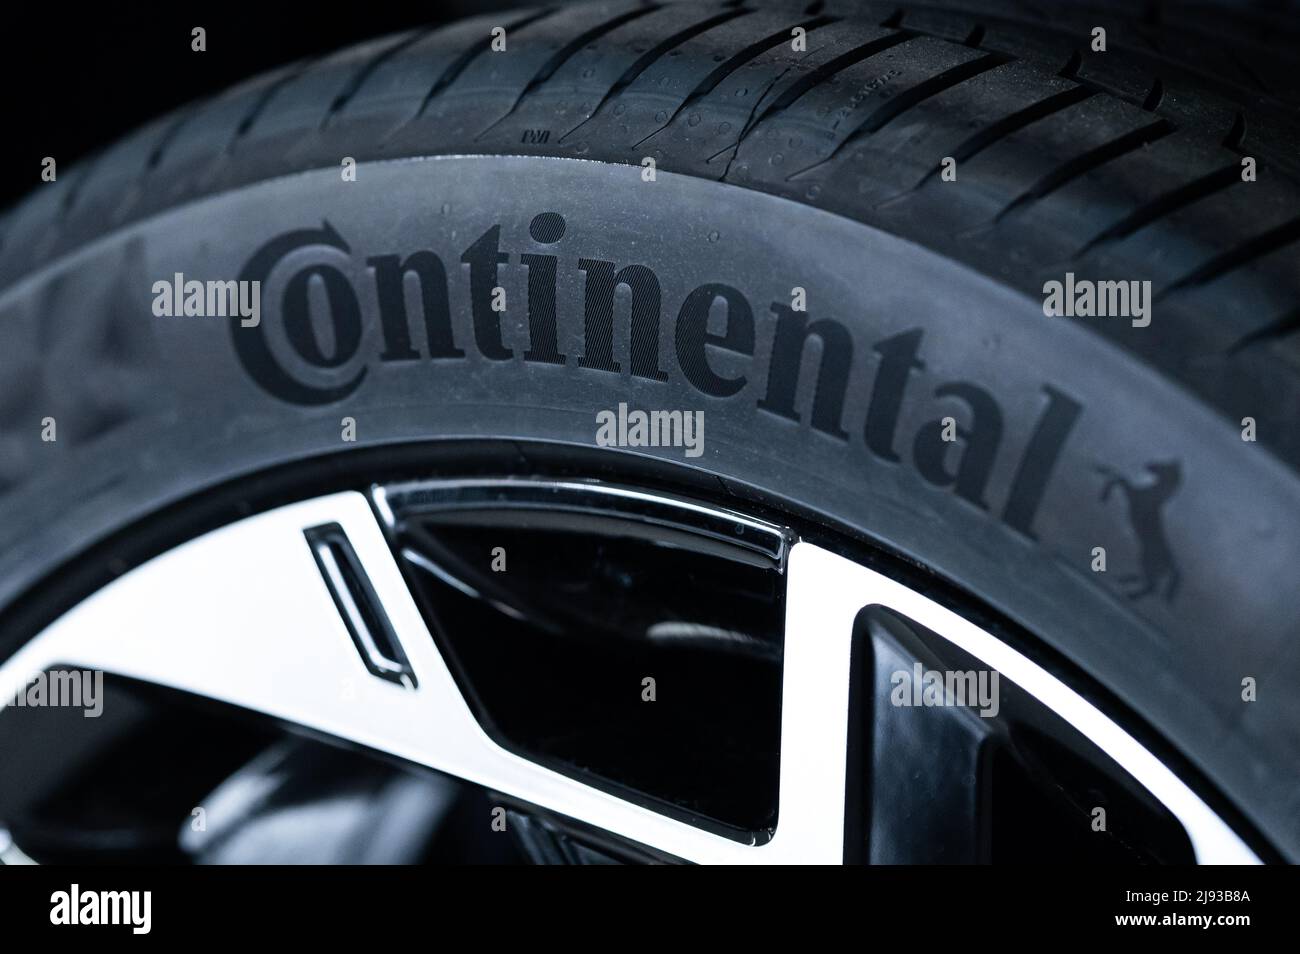 - - photography stock Continental hi-res Alamy 5 images Page tire and